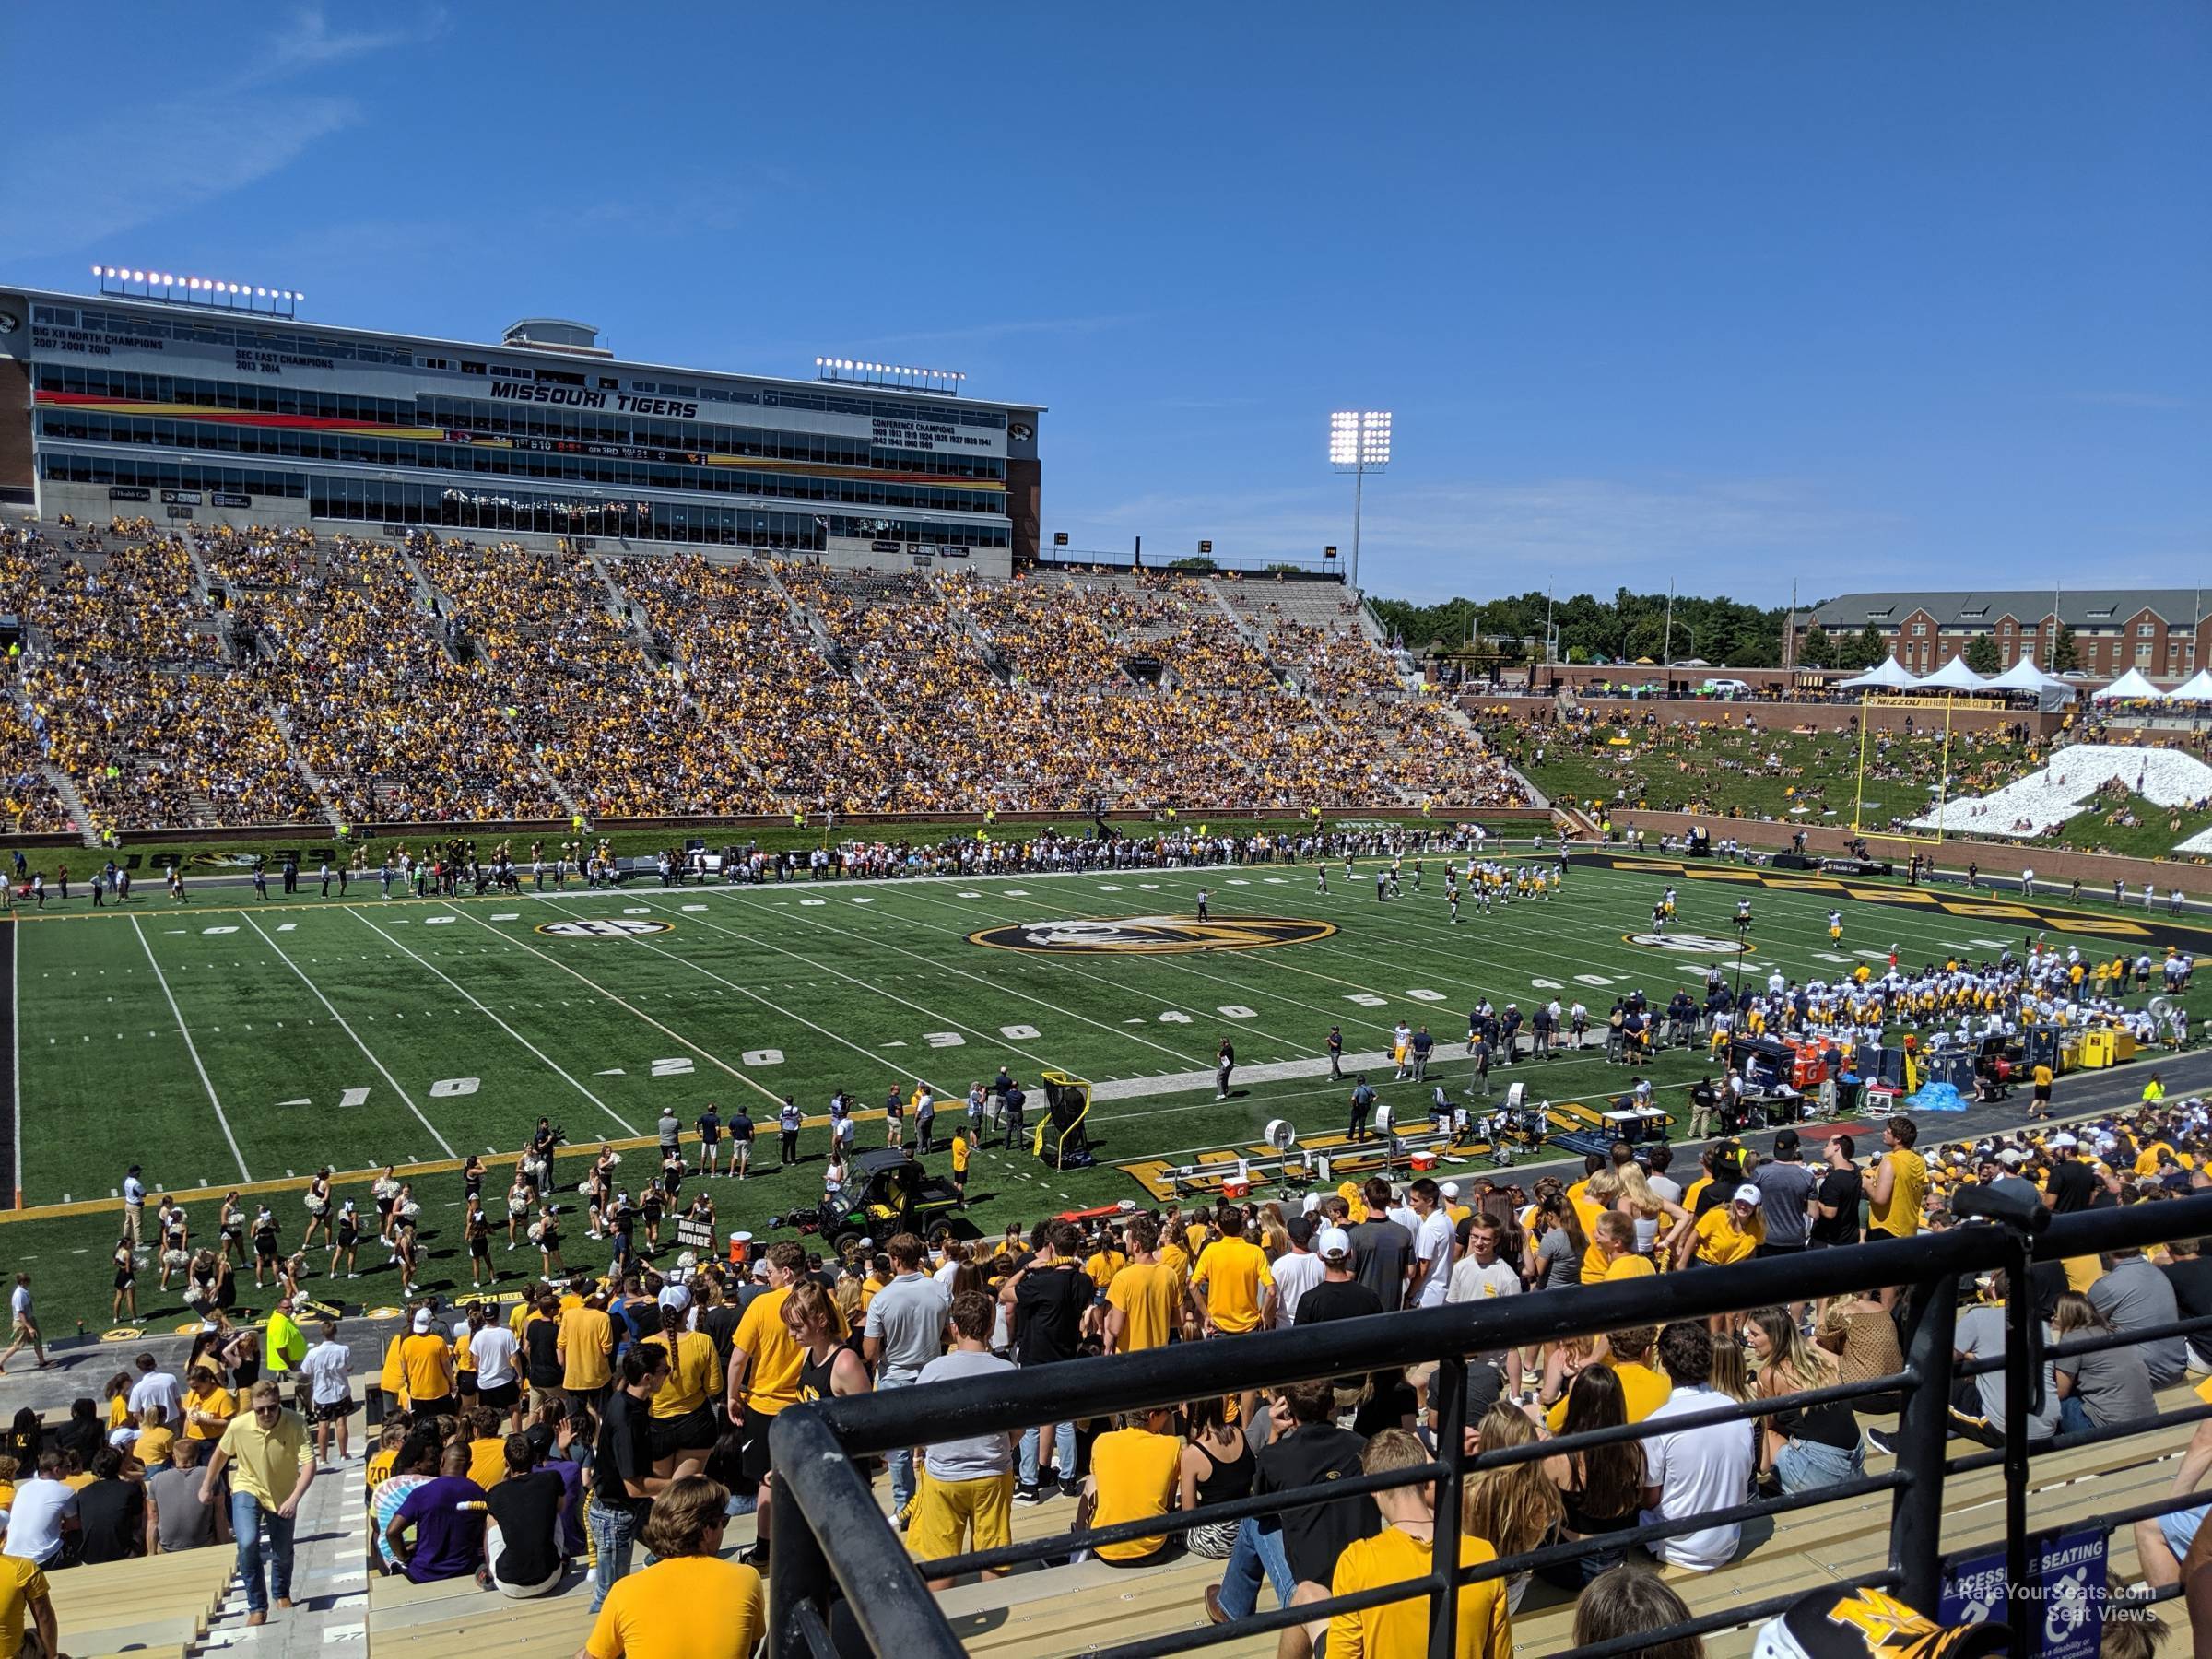 section 103, row 38 seat view  - faurot field